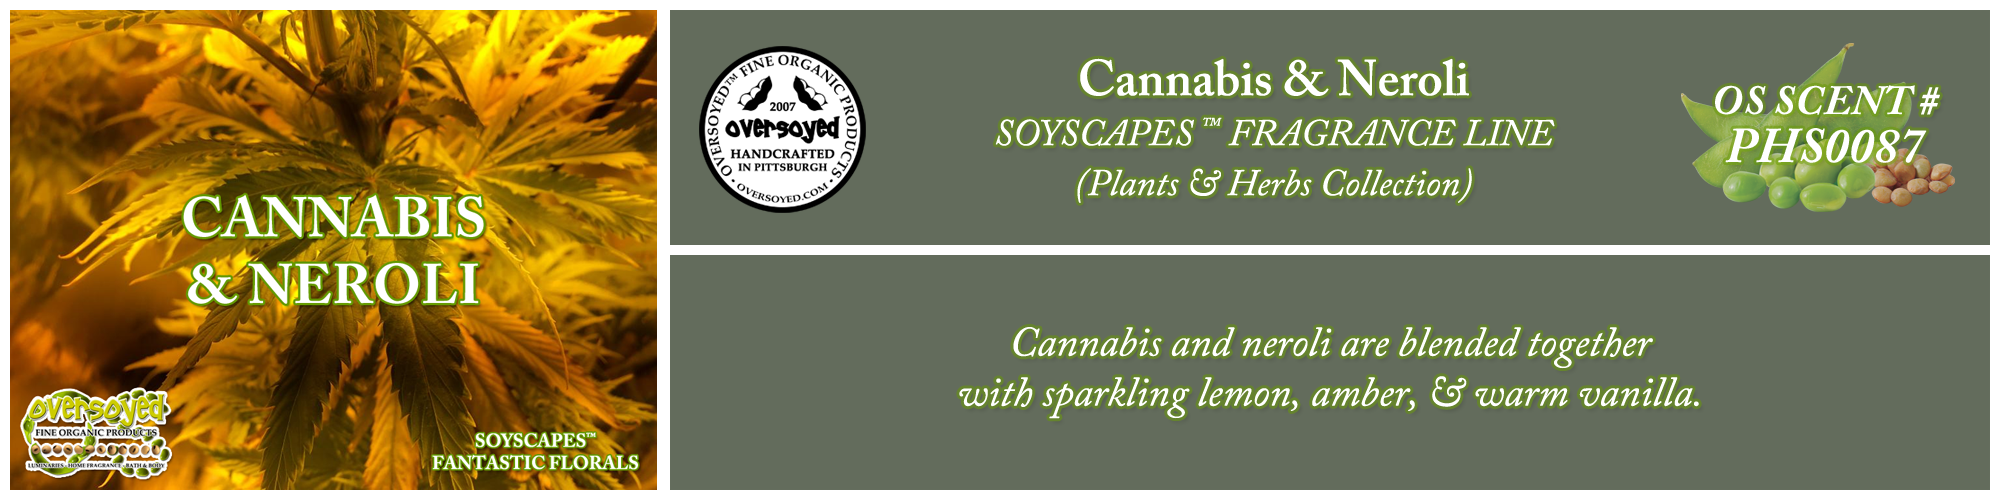 Cannabis & Neroli Handcrafted Products Collection